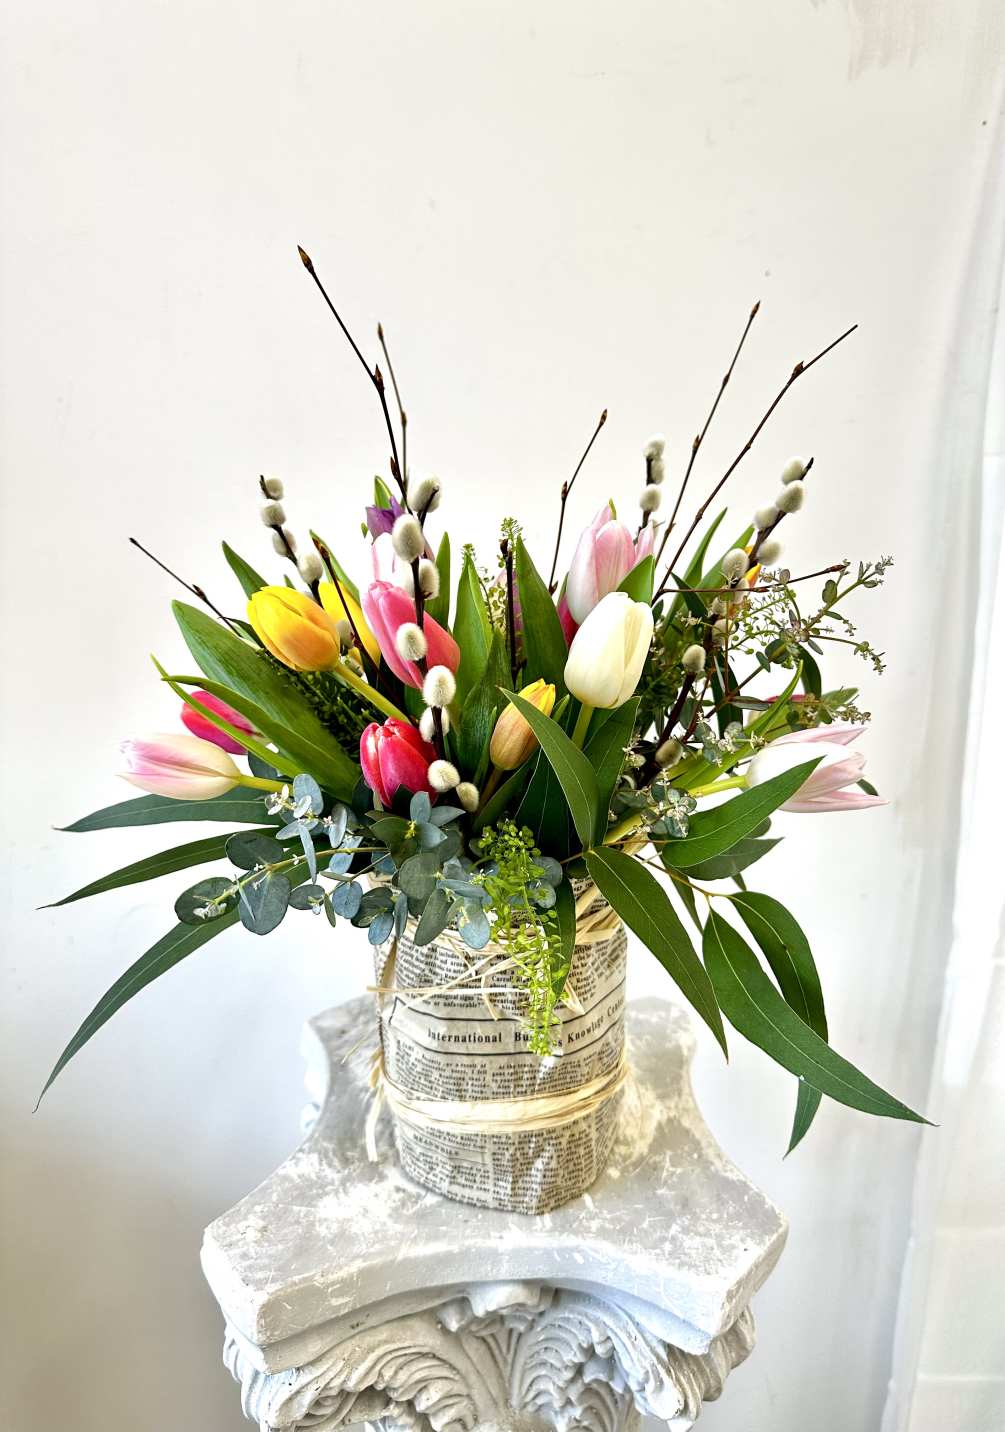 Indulge in the beauty of nature with our exquisite Spring Tulips flower